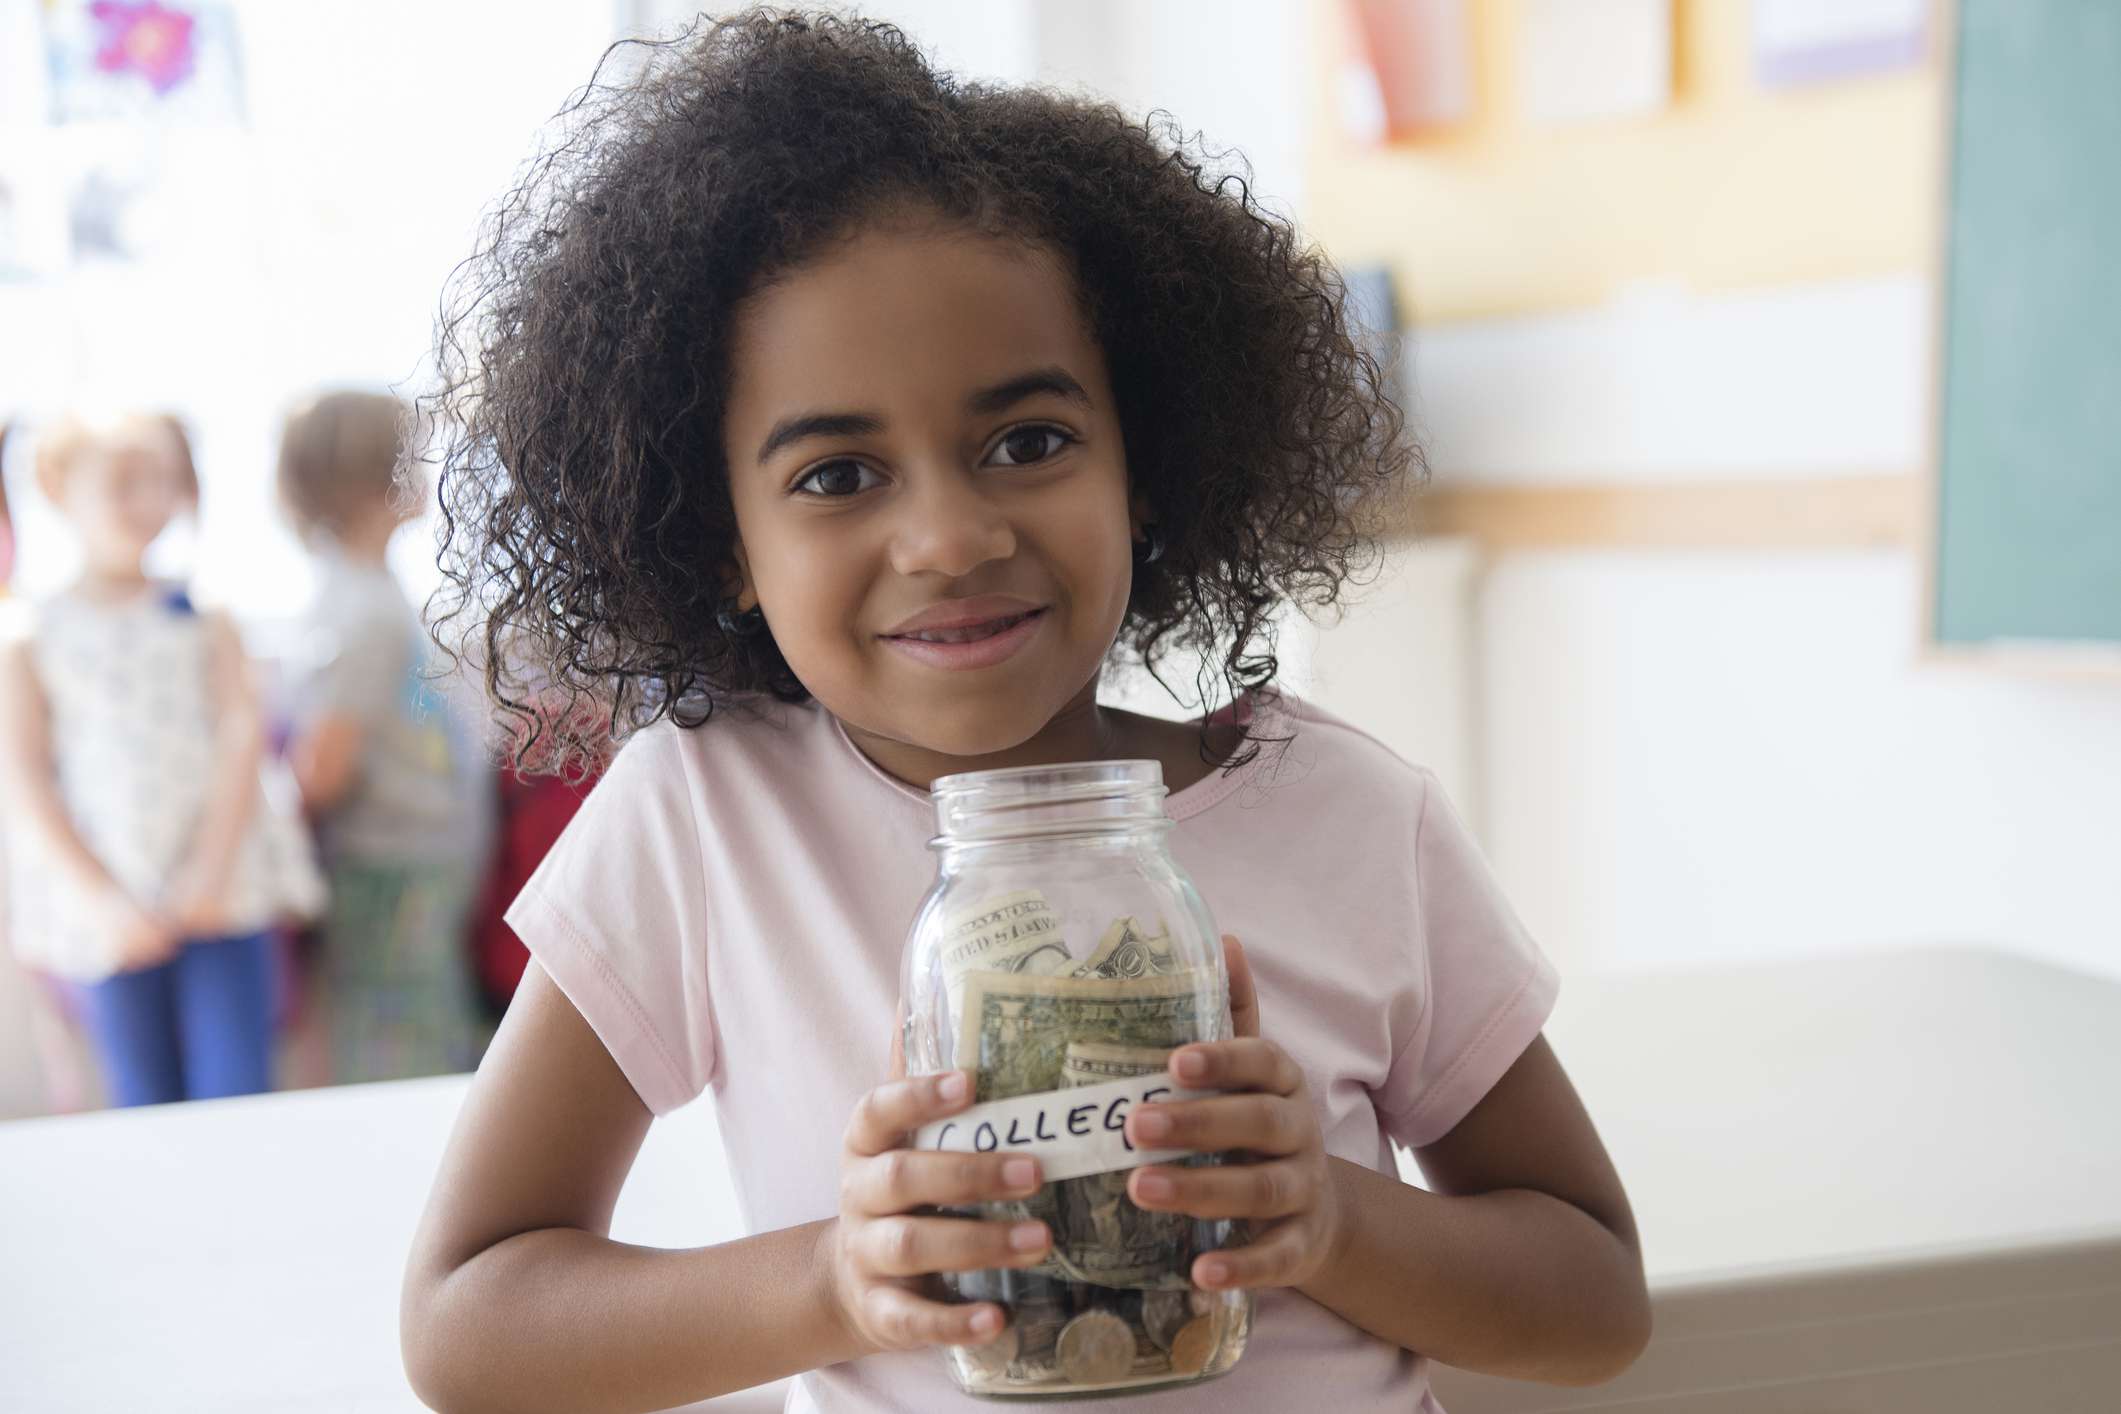 Little girl with money jar labeled "college"